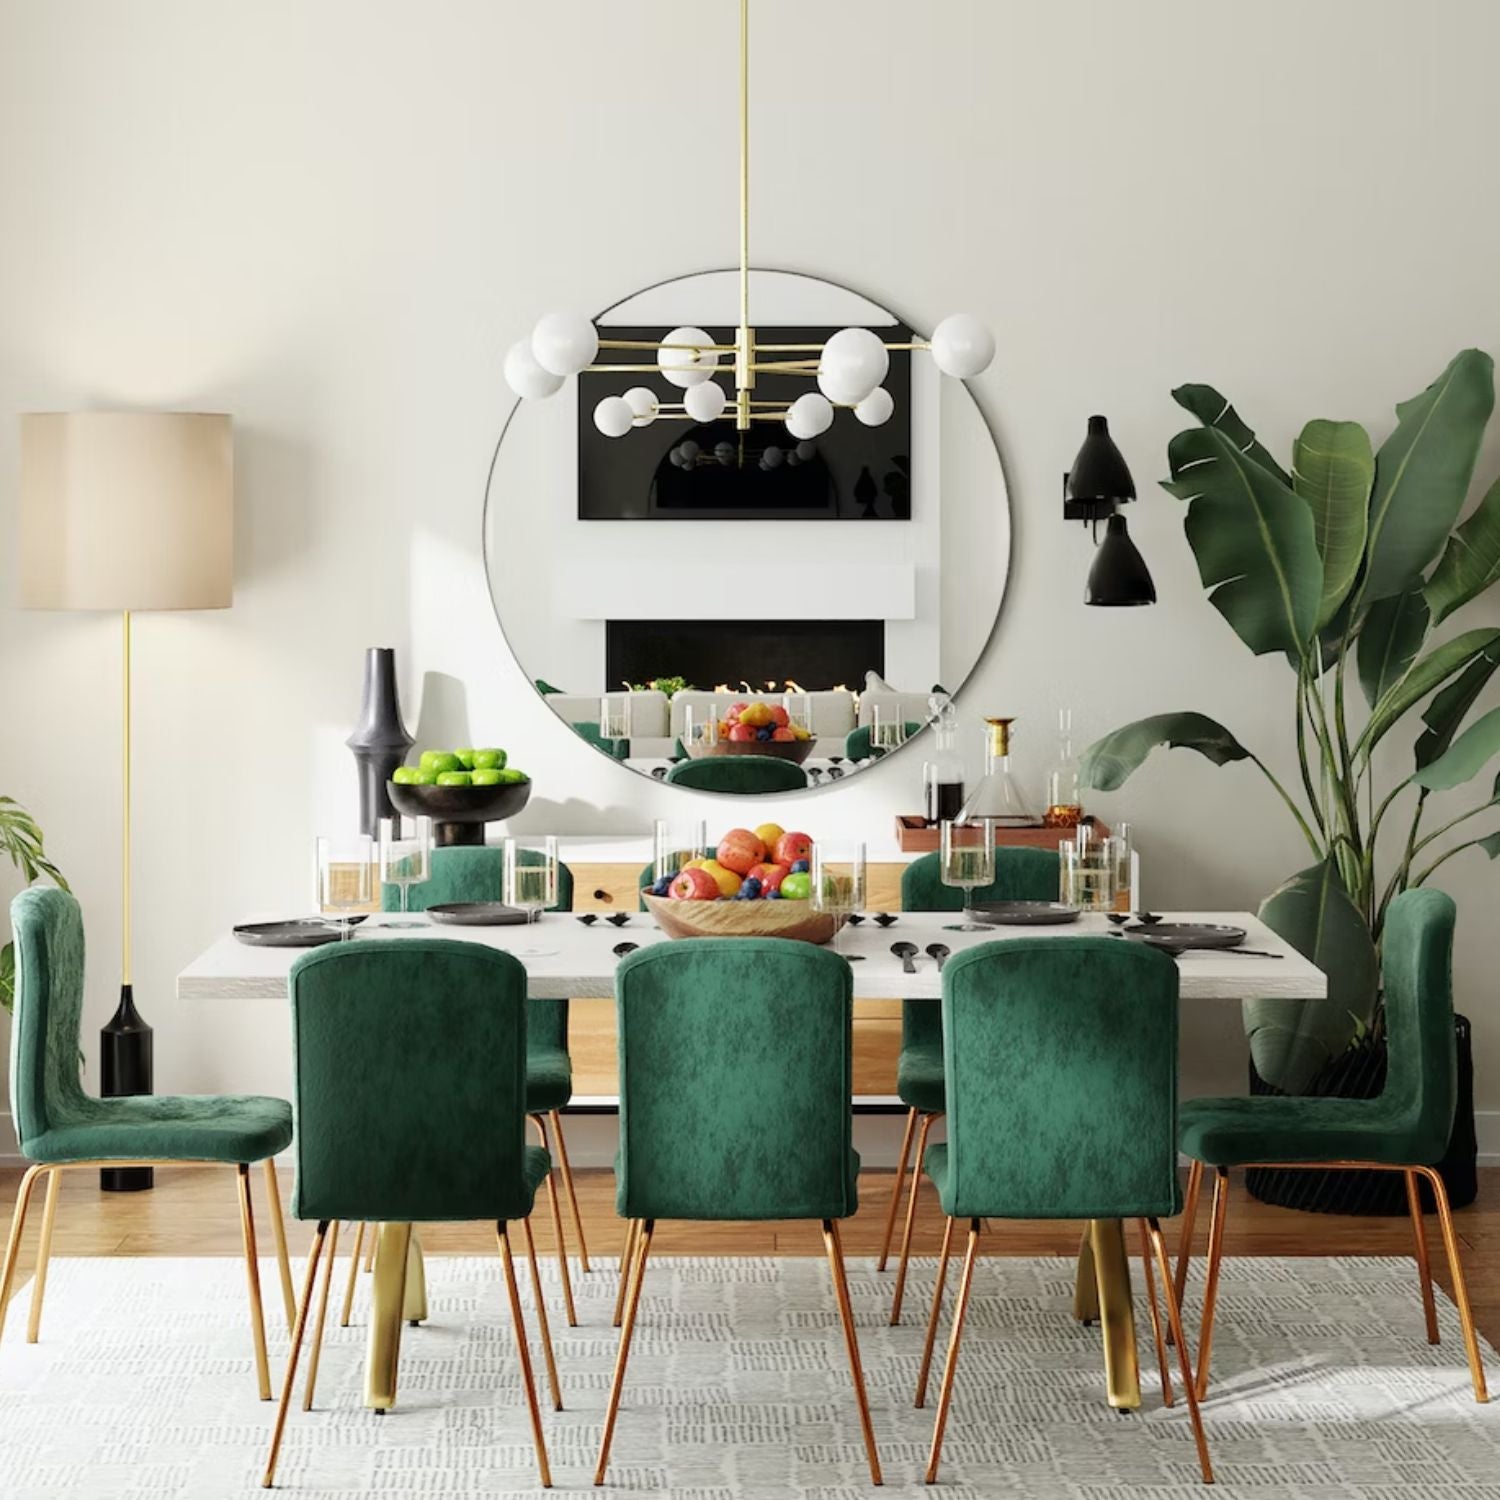 Celebrate Individuality with Customizable Furniture Tailored to Your Tastes